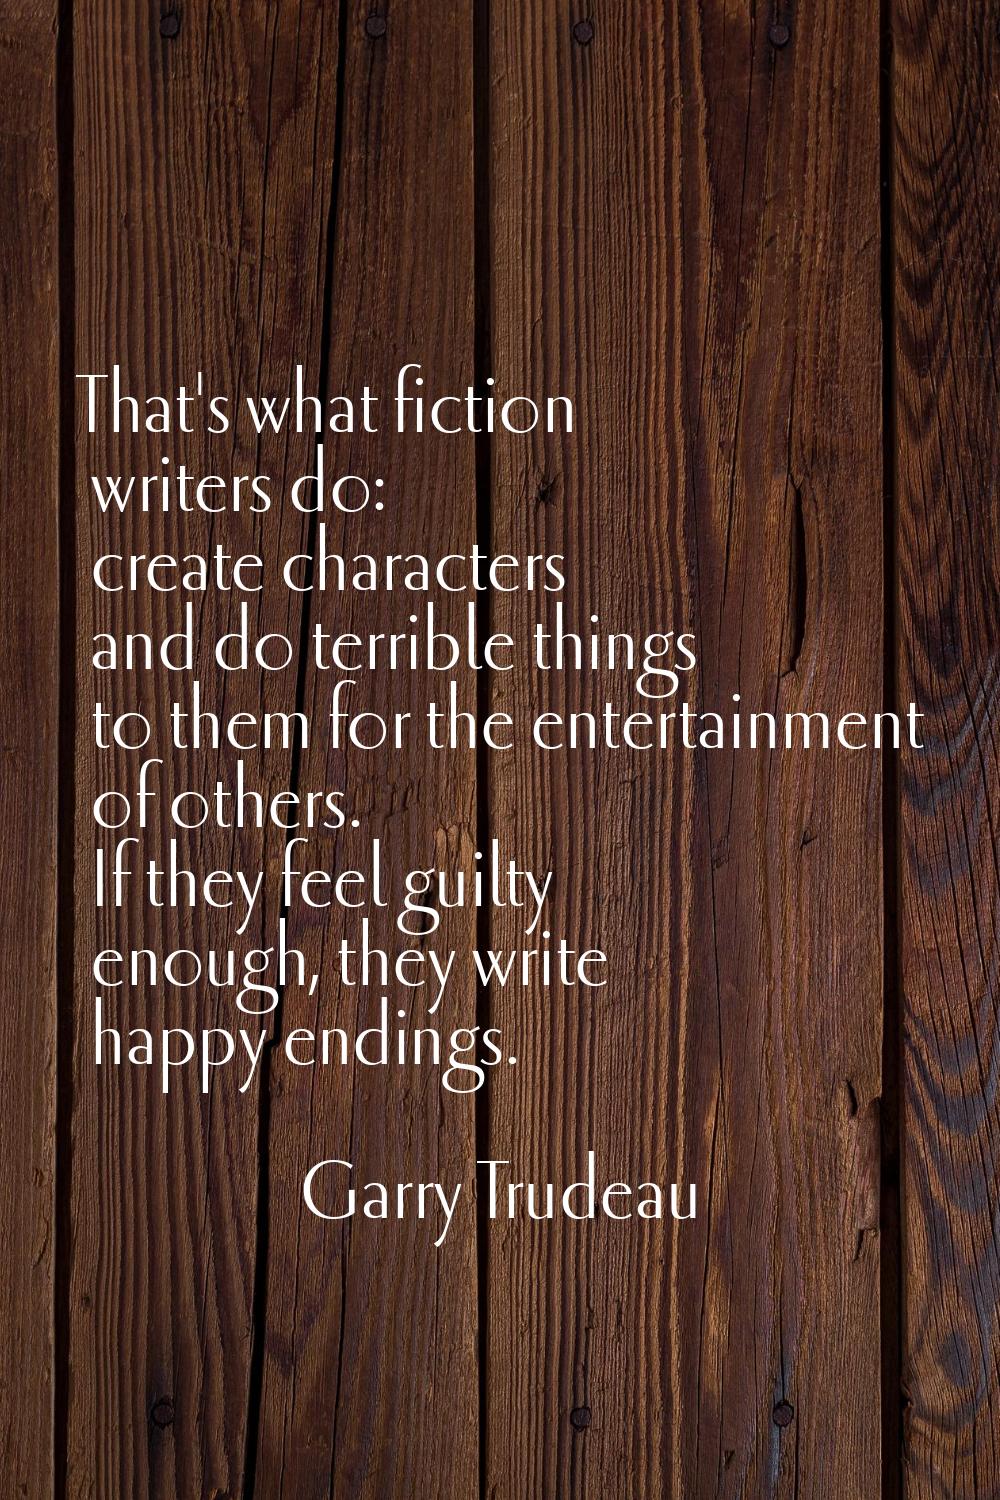 That's what fiction writers do: create characters and do terrible things to them for the entertainm